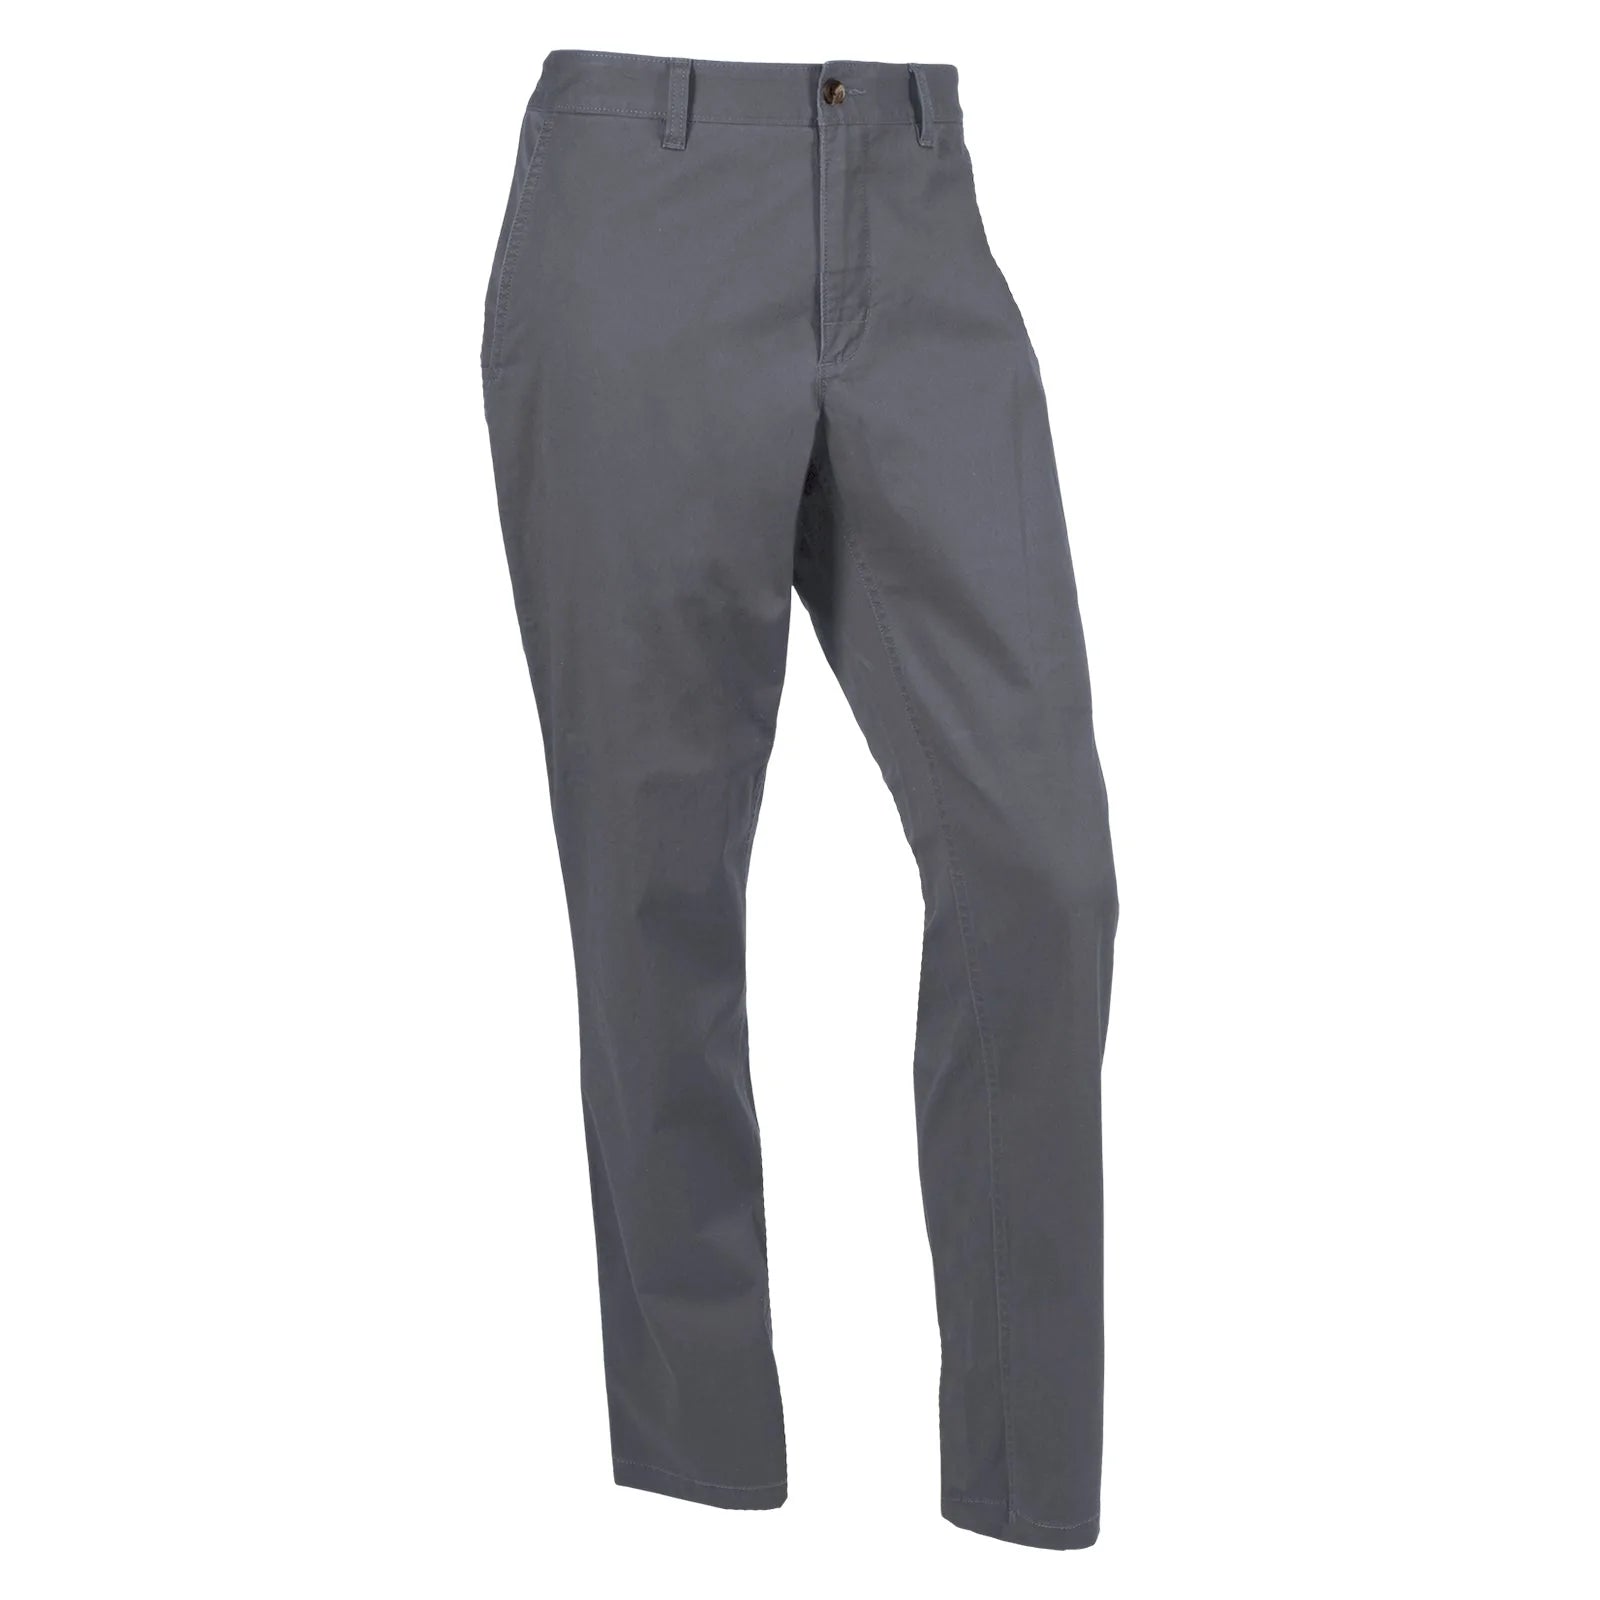 Men's Homestead Chino Pant Relaxed Fit